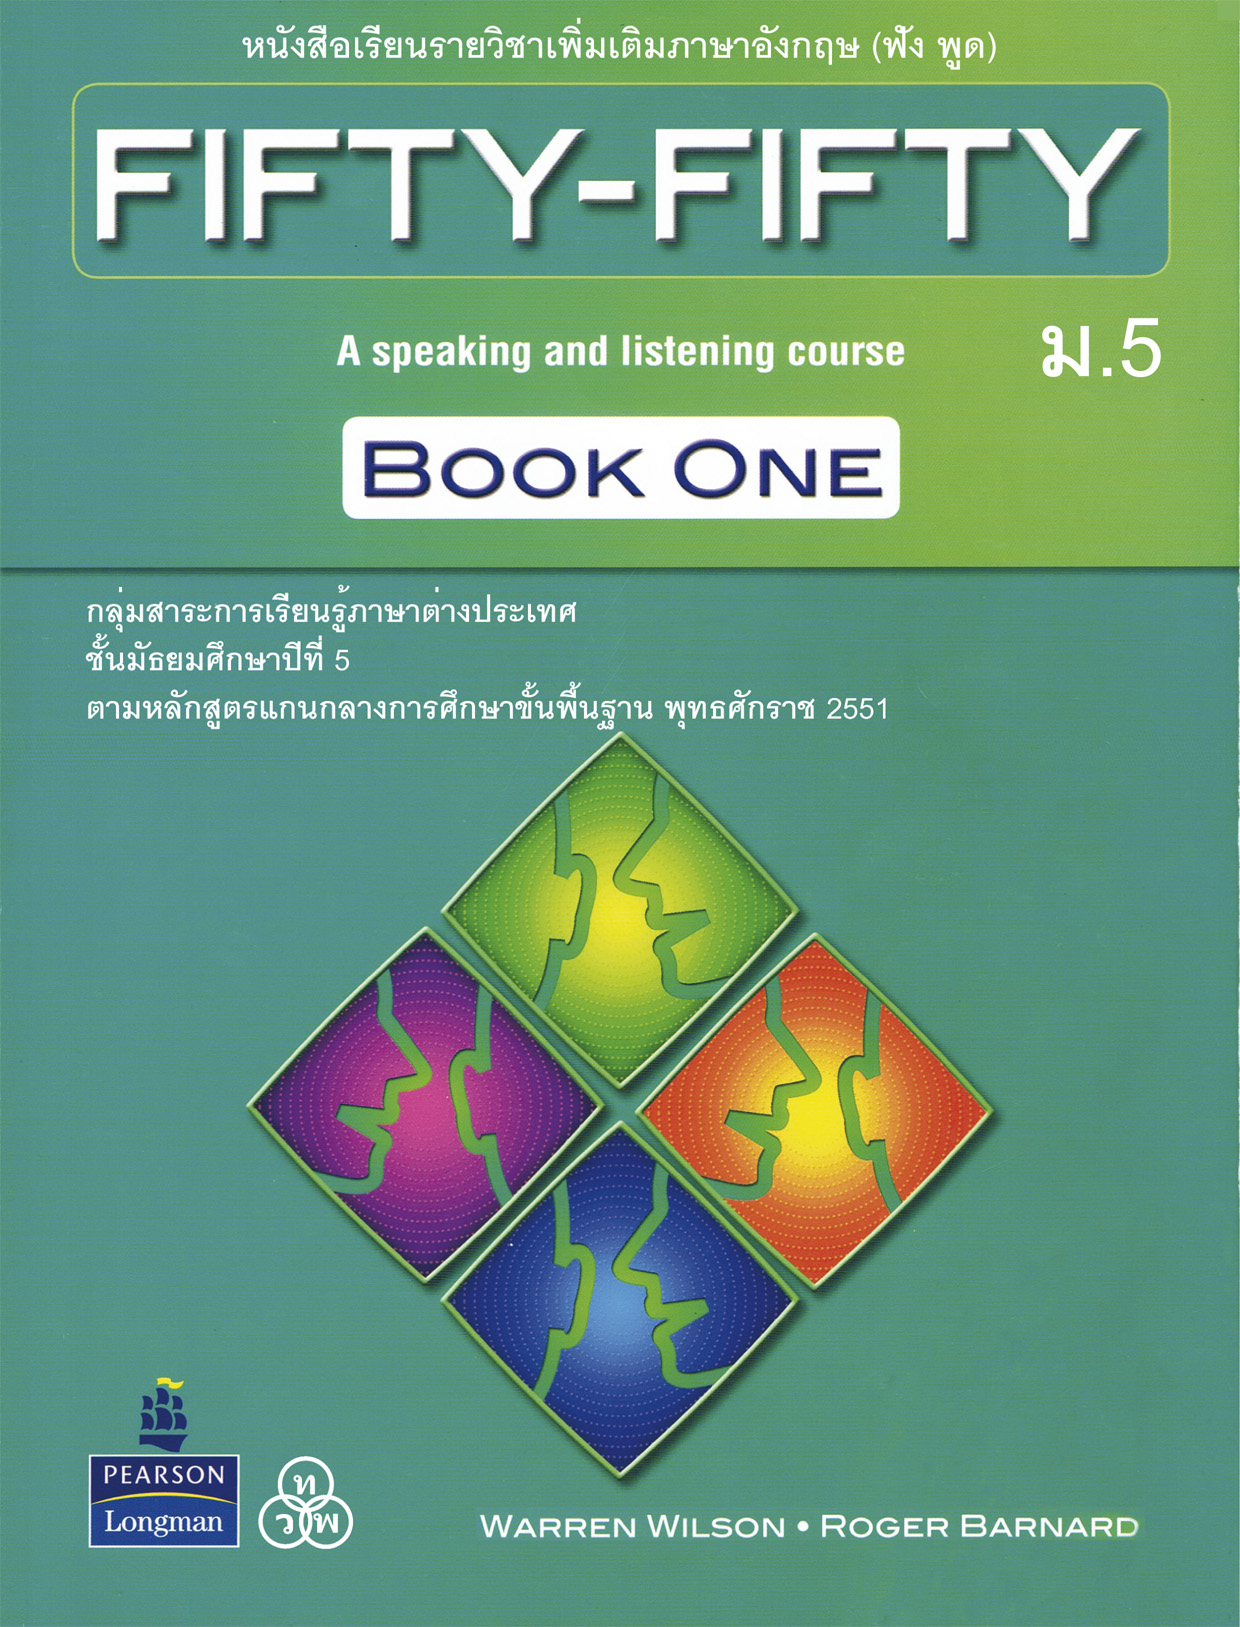 FIFTY-FIFTY BOOK ONE